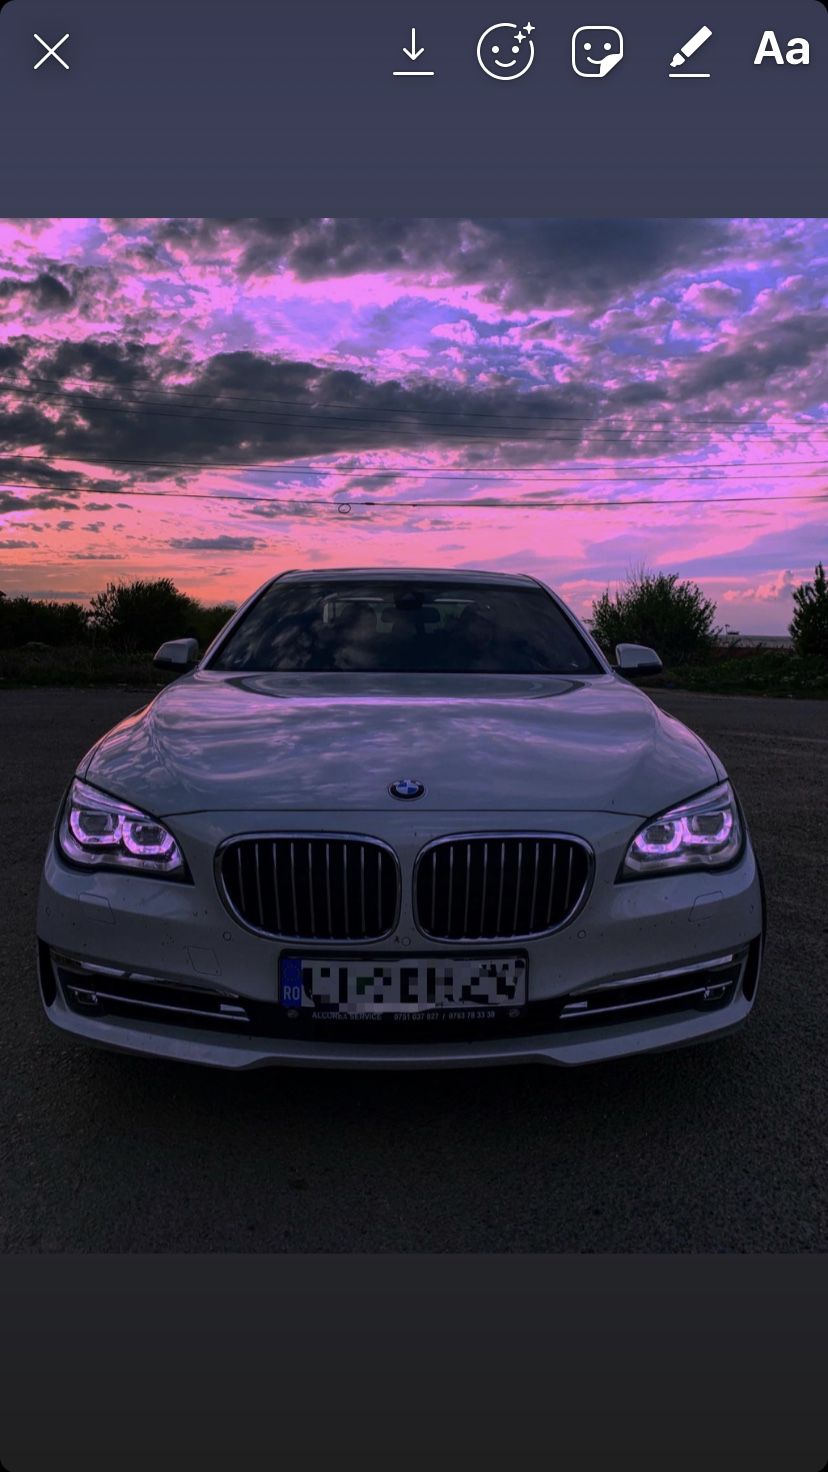 Front view of a silver BMW 7 series - BMW